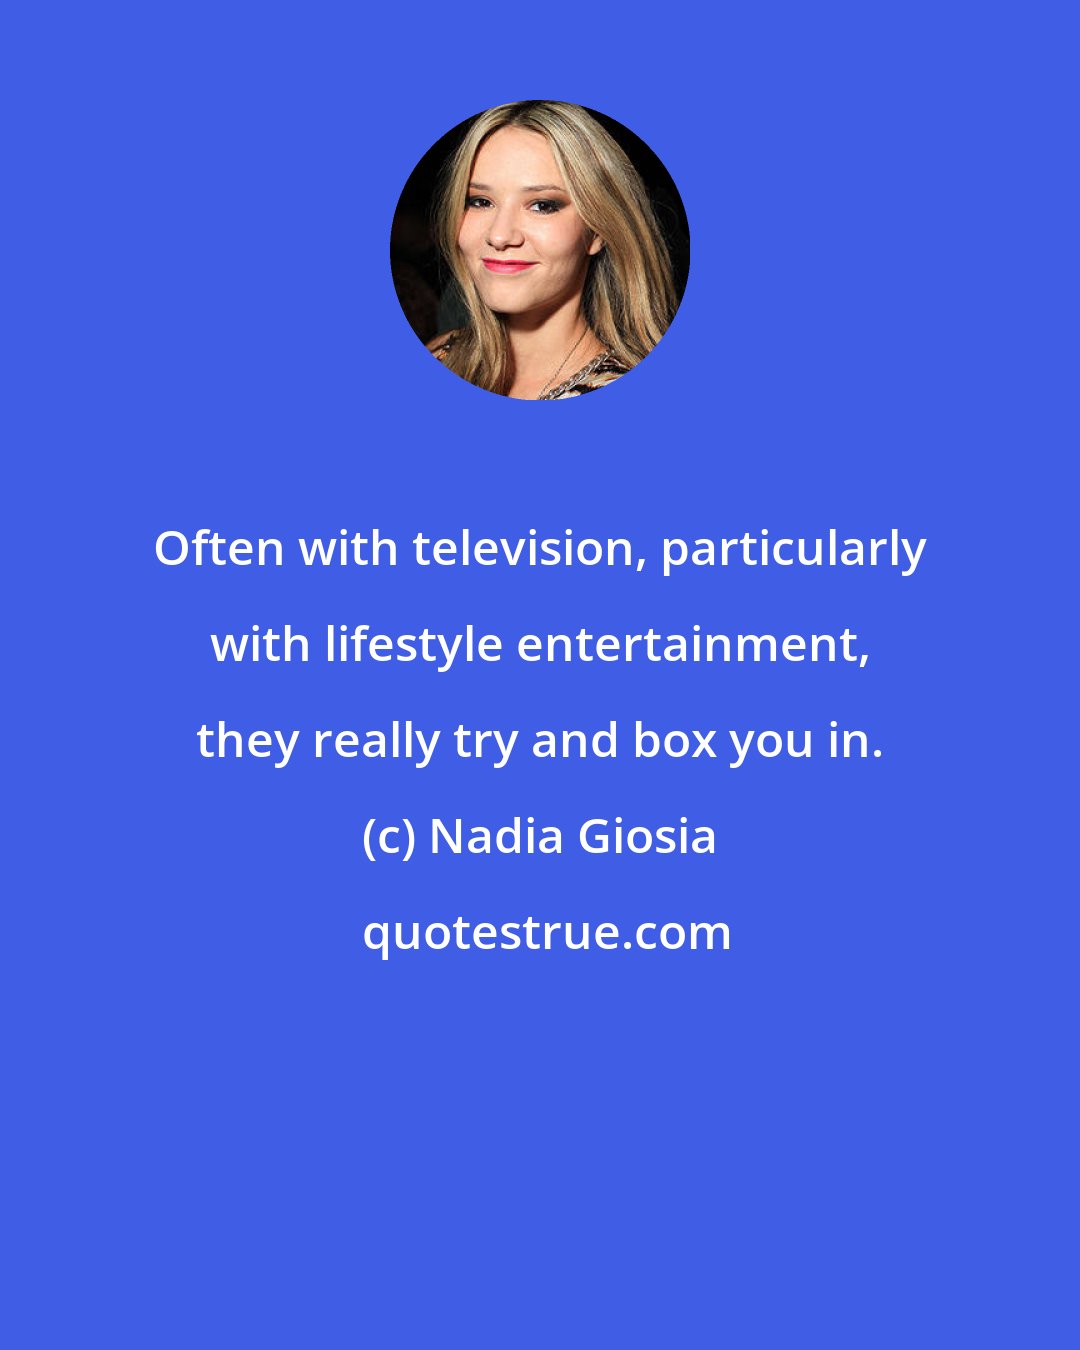 Nadia Giosia: Often with television, particularly with lifestyle entertainment, they really try and box you in.